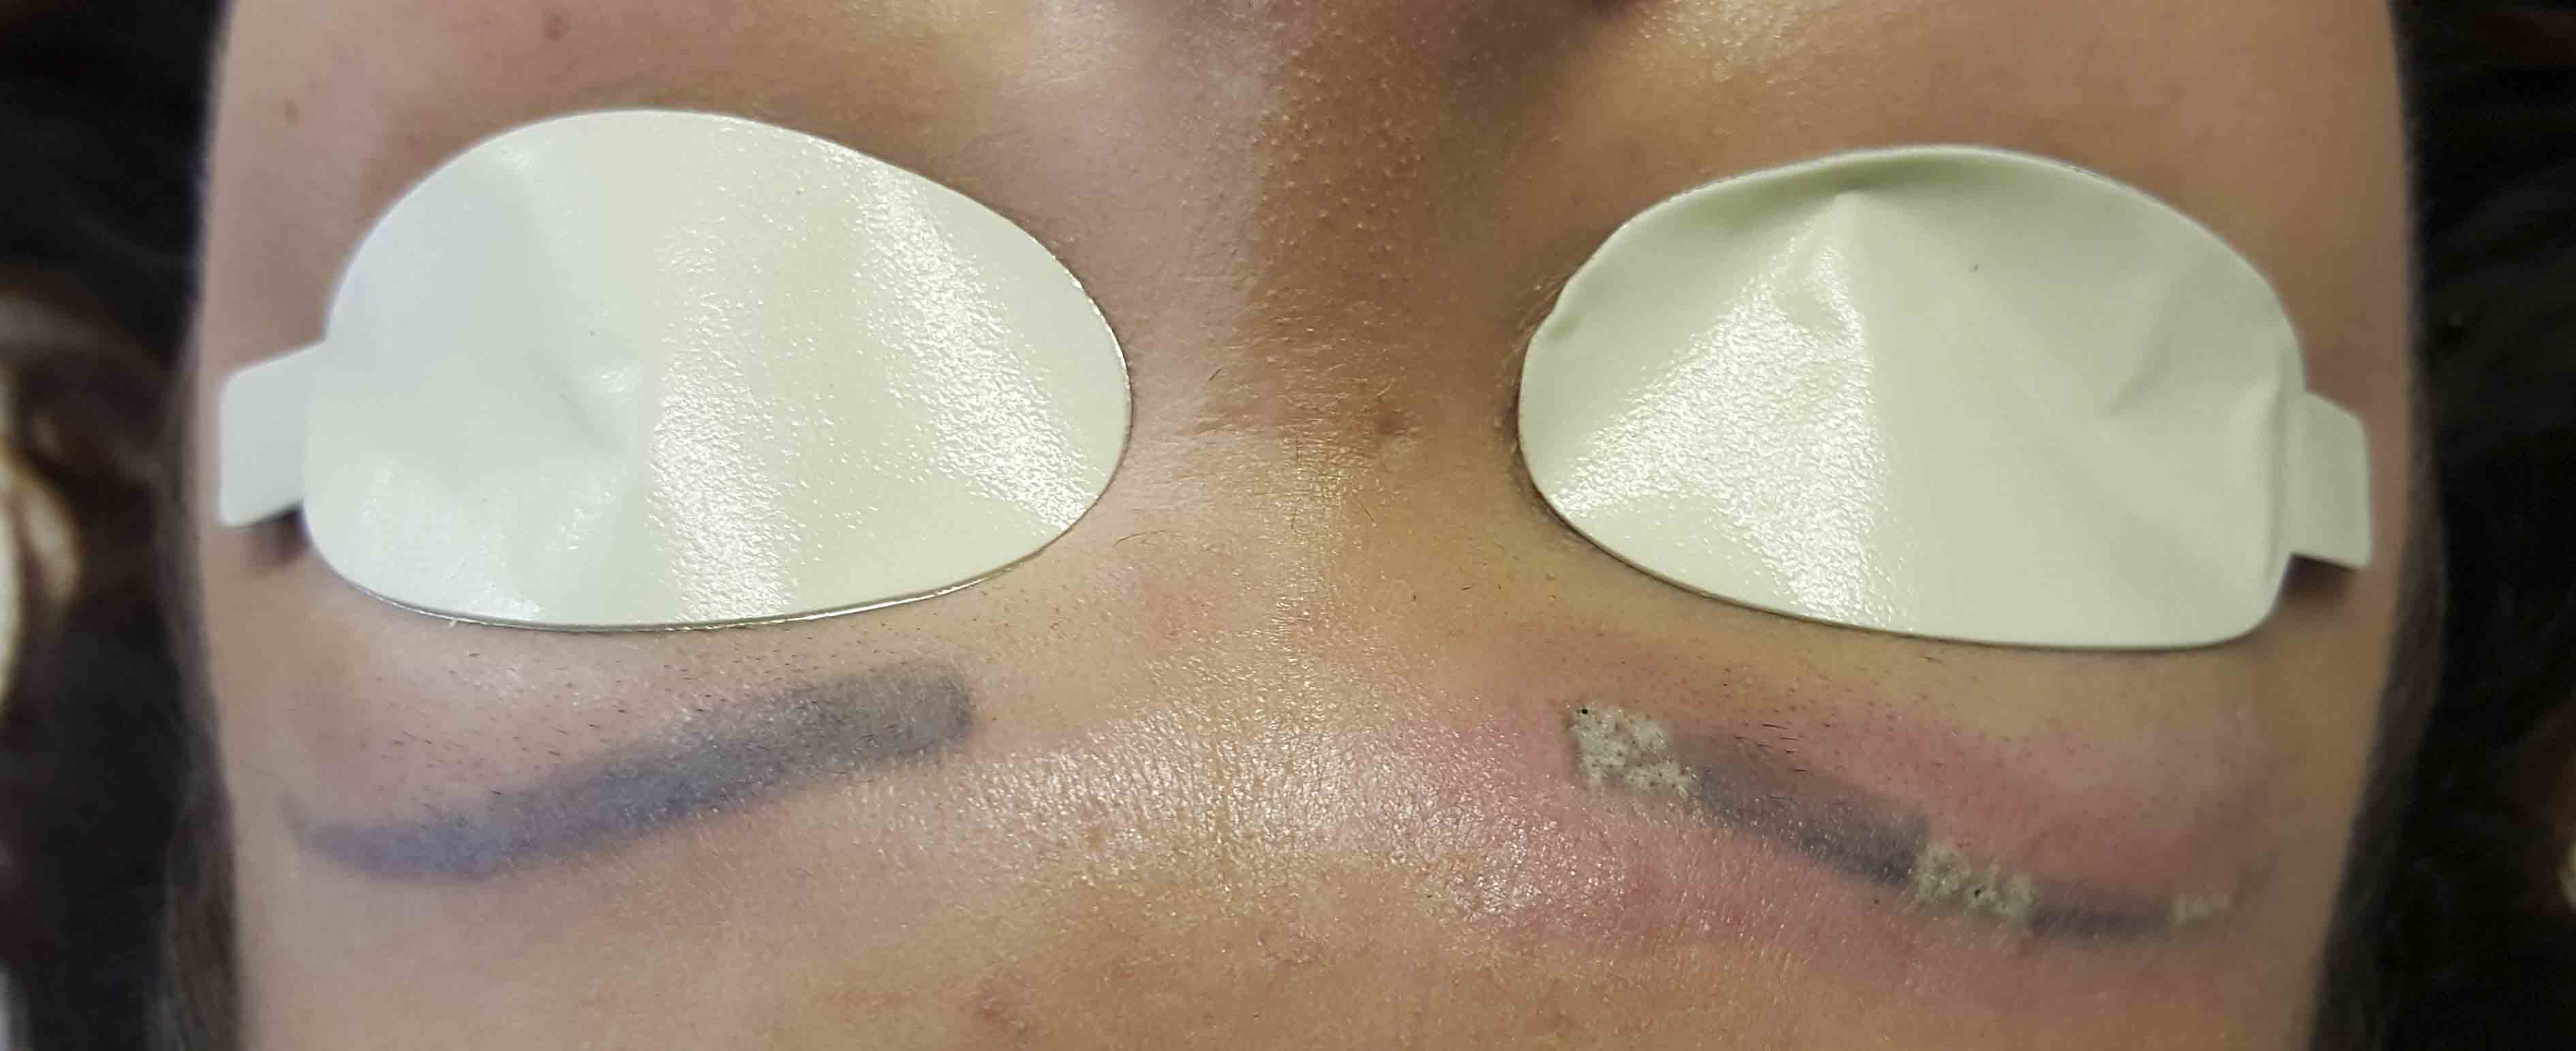 tattooed brows laser removal photo